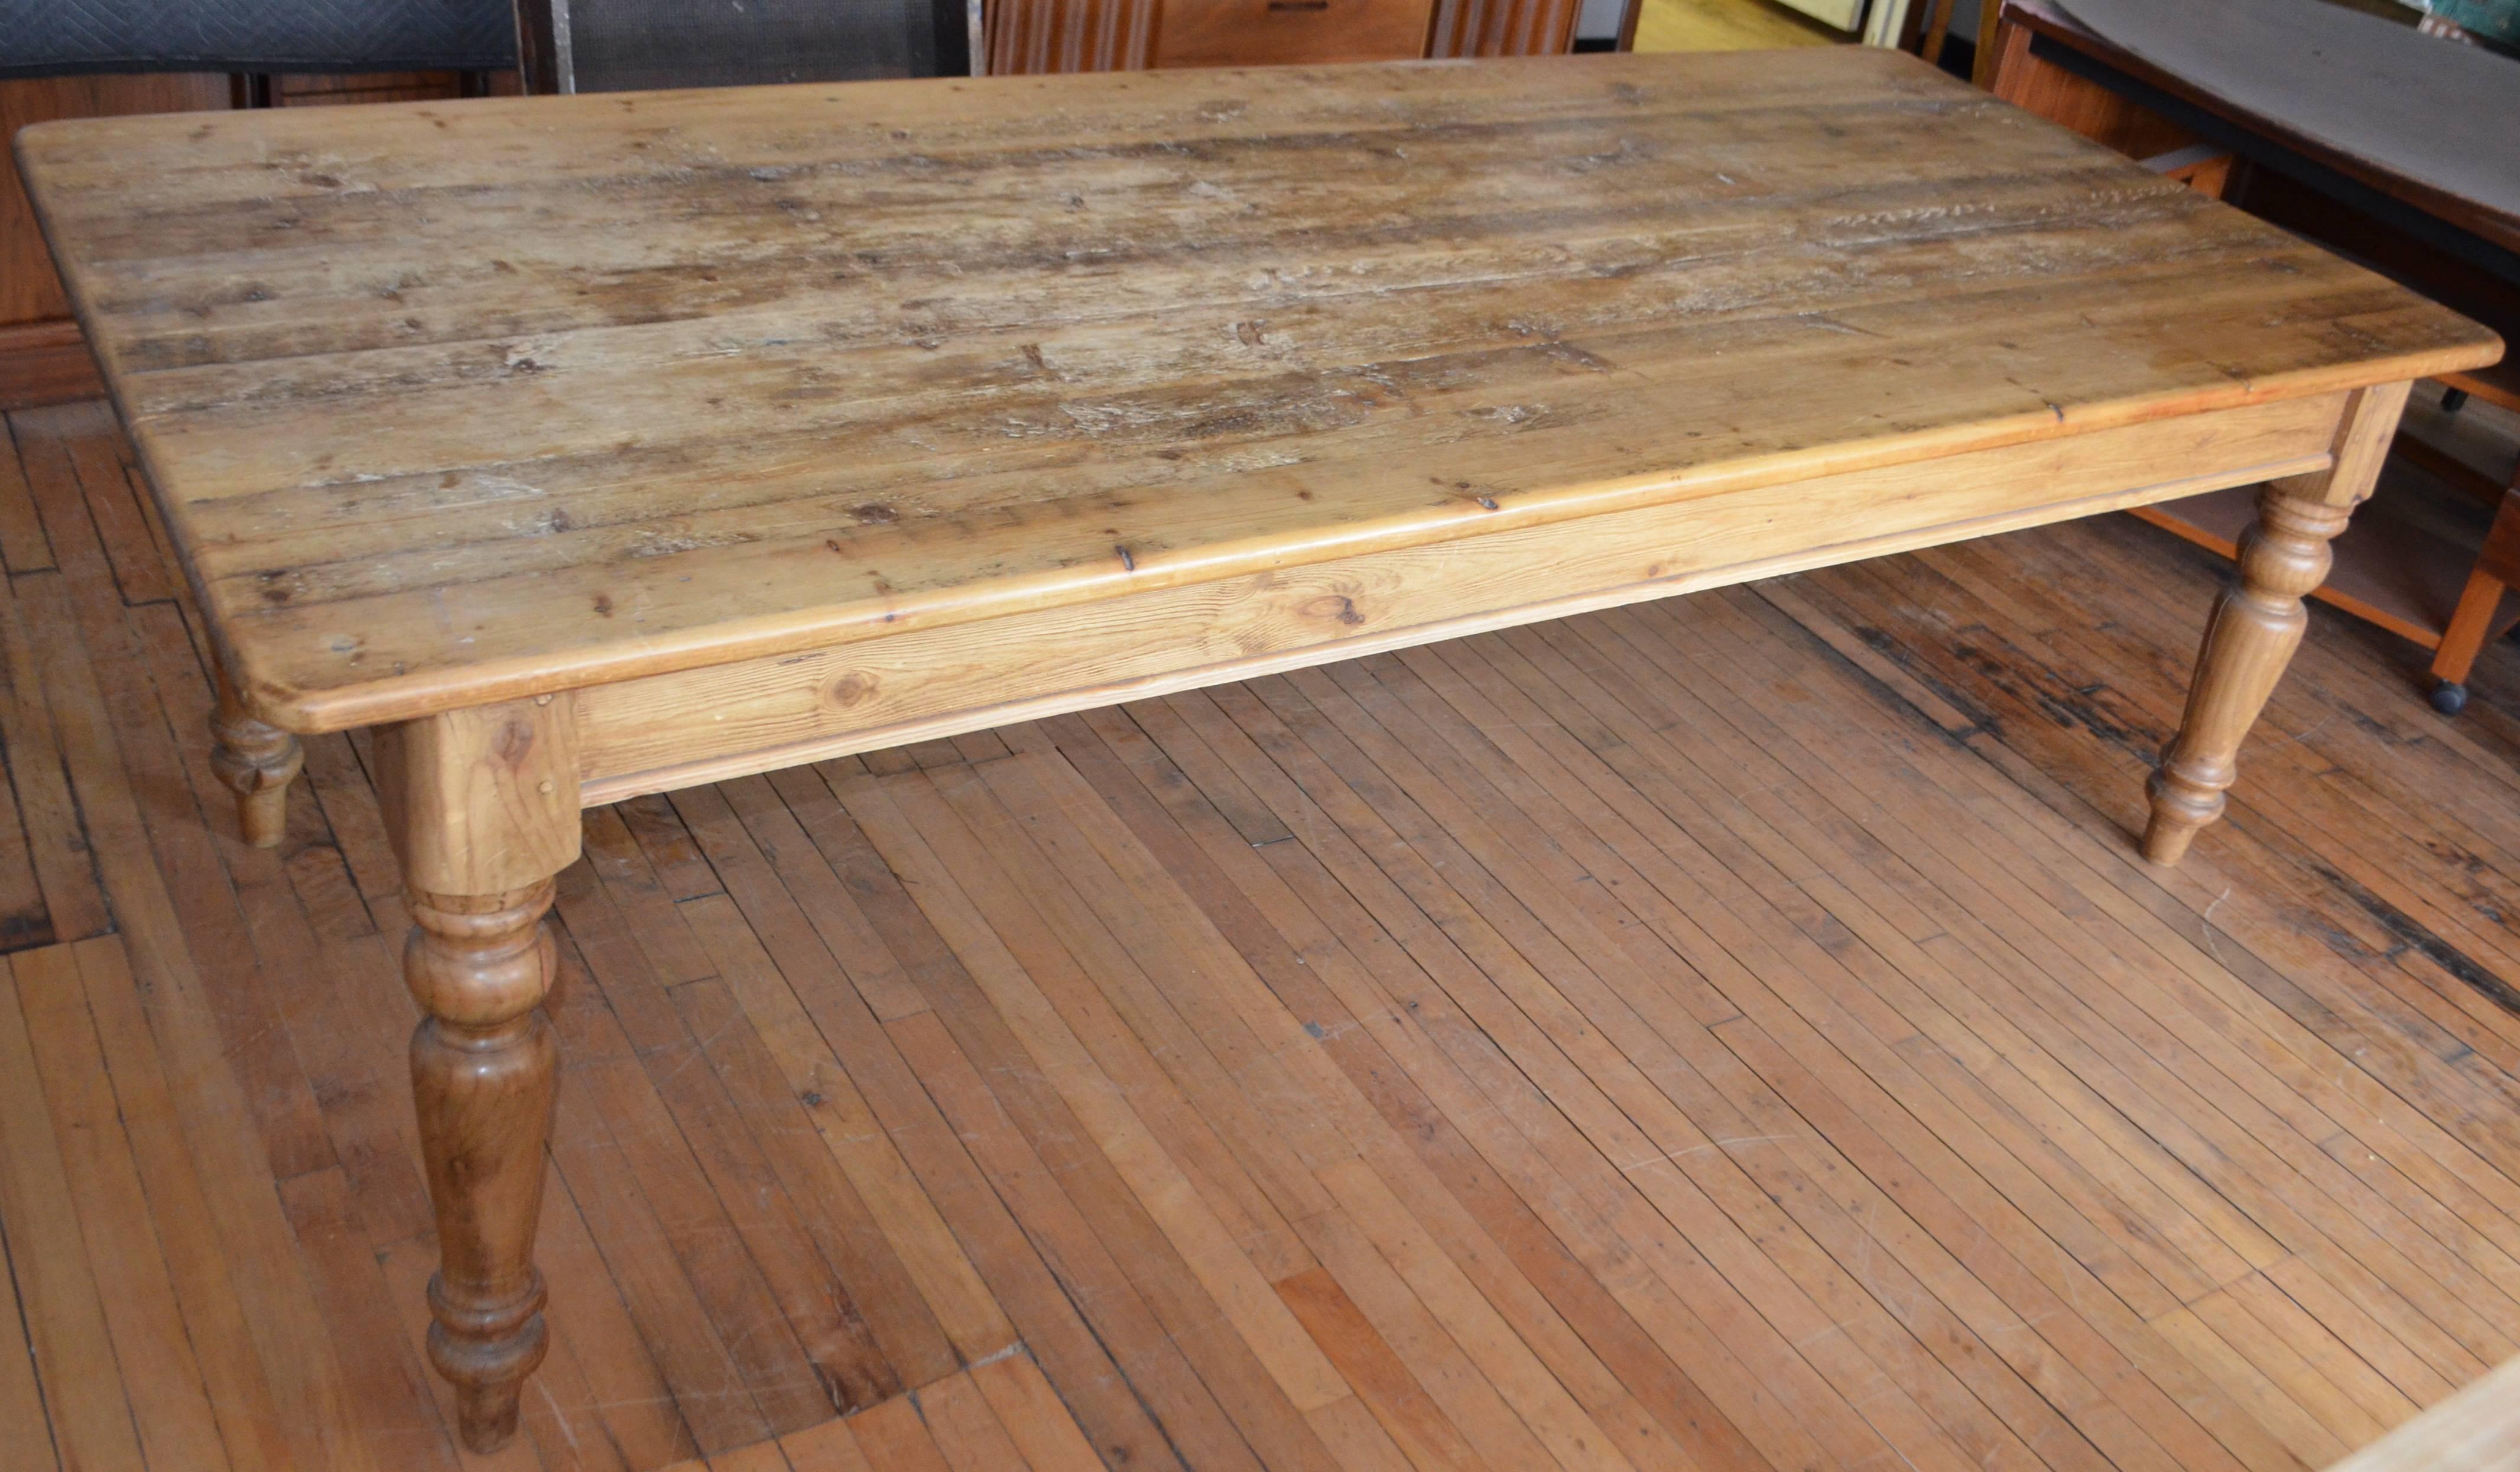 American Late 19th Century Farm Table from Pine with Balustrade Legs